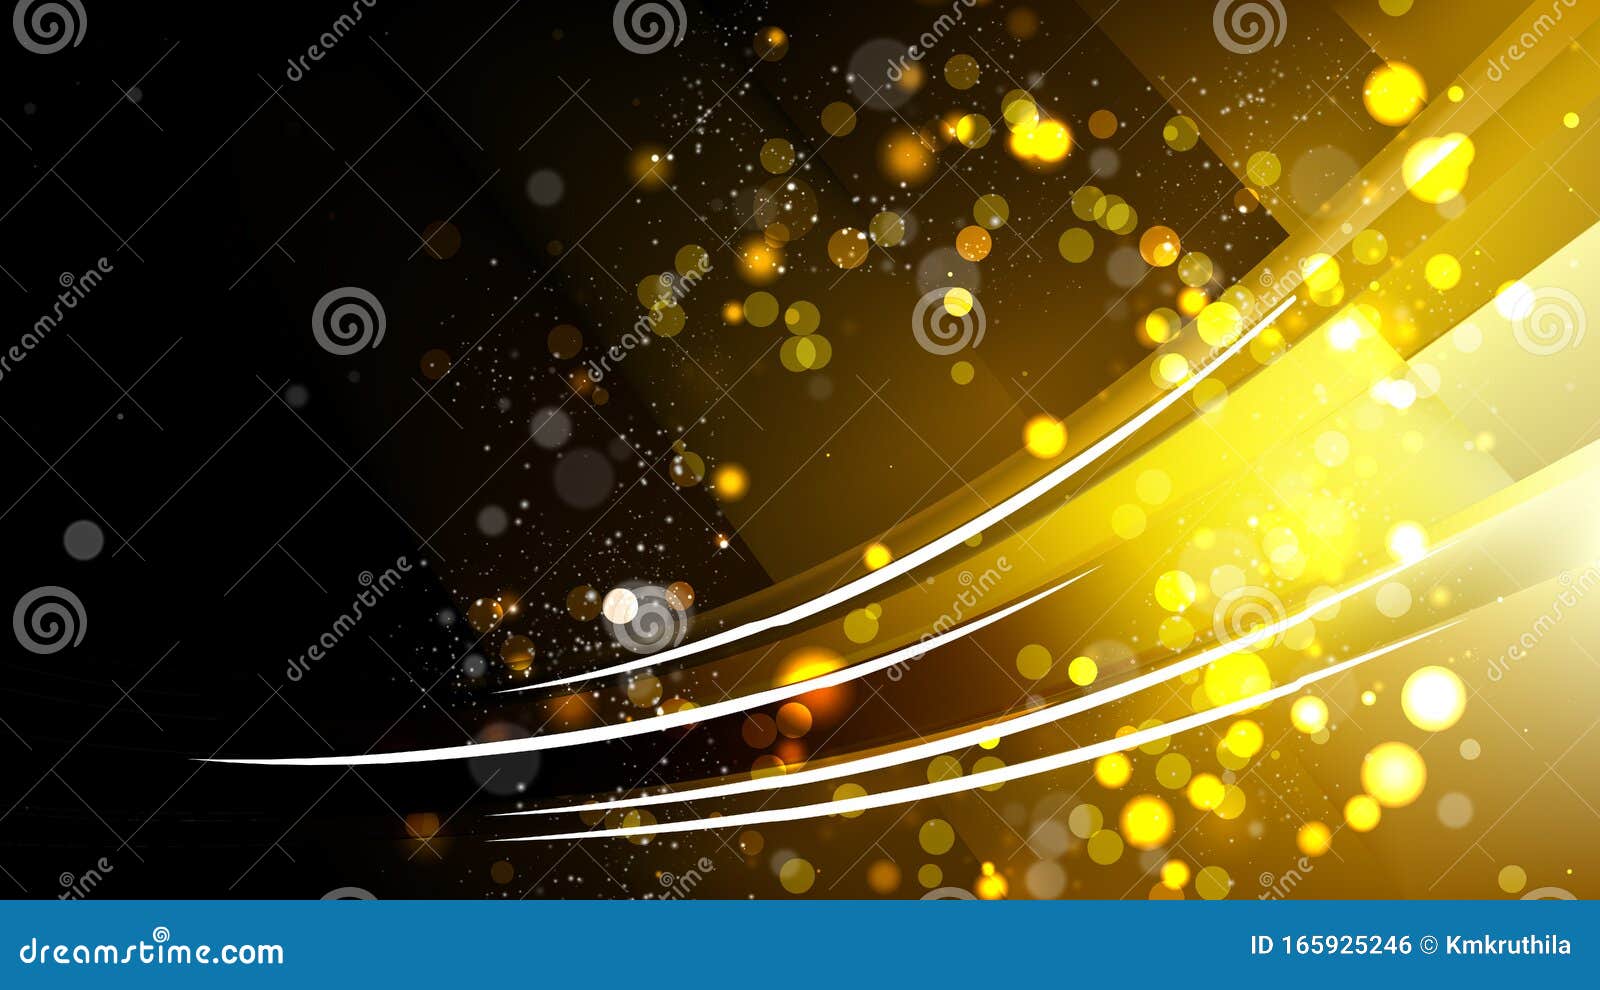 Abstract Black and Gold Blurred Lights Background Vector Stock Vector ...